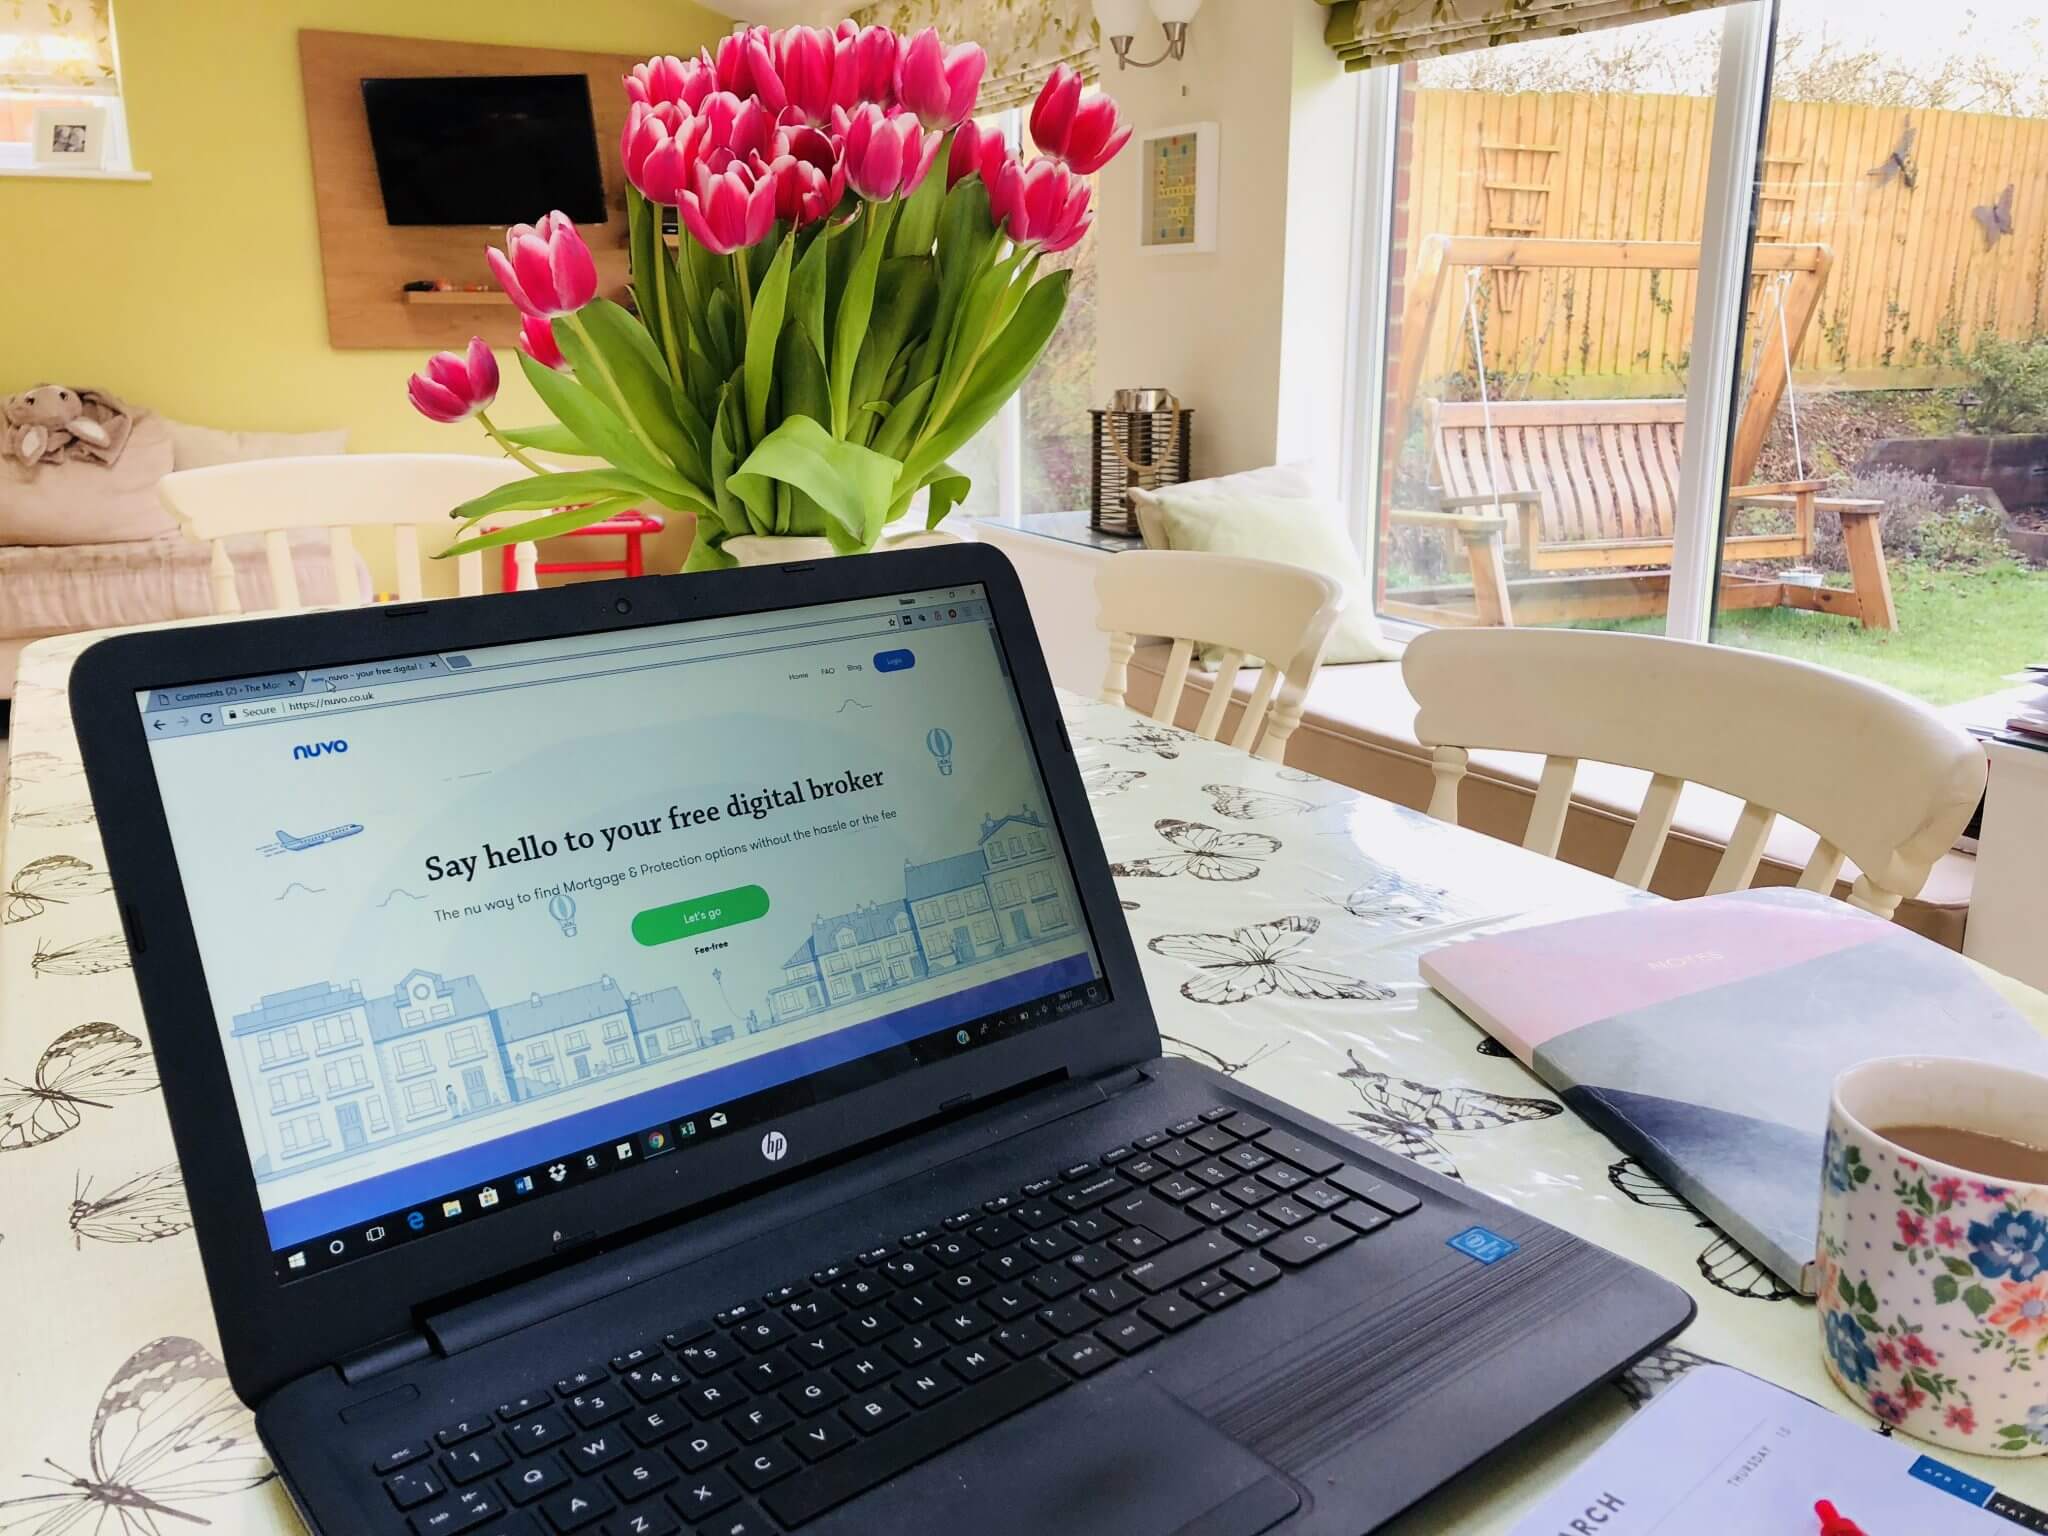 Fastest way to get a mortgage approved with Nuvo - computer on table with flowers